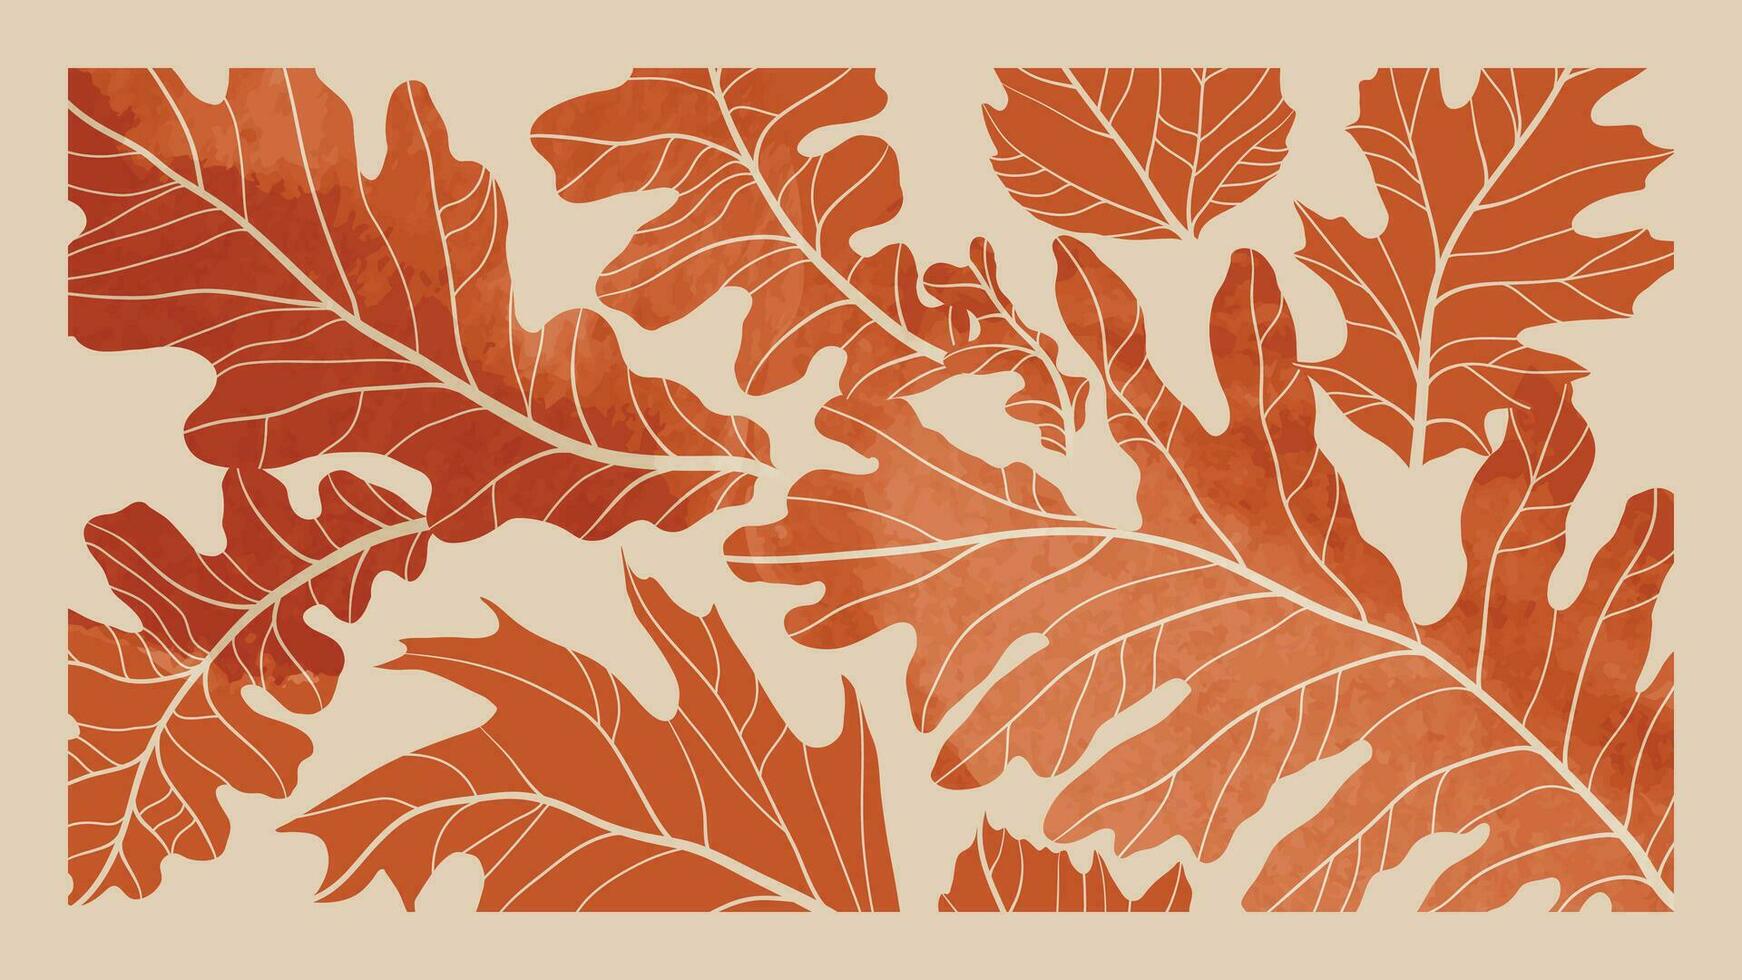 Abstract art autumn background vector. Botanic fall season hand drawn pattern design with oak leaves. Simple contemporary style illustrated Design for fabric, print, cover, banner, wallpaper. vector